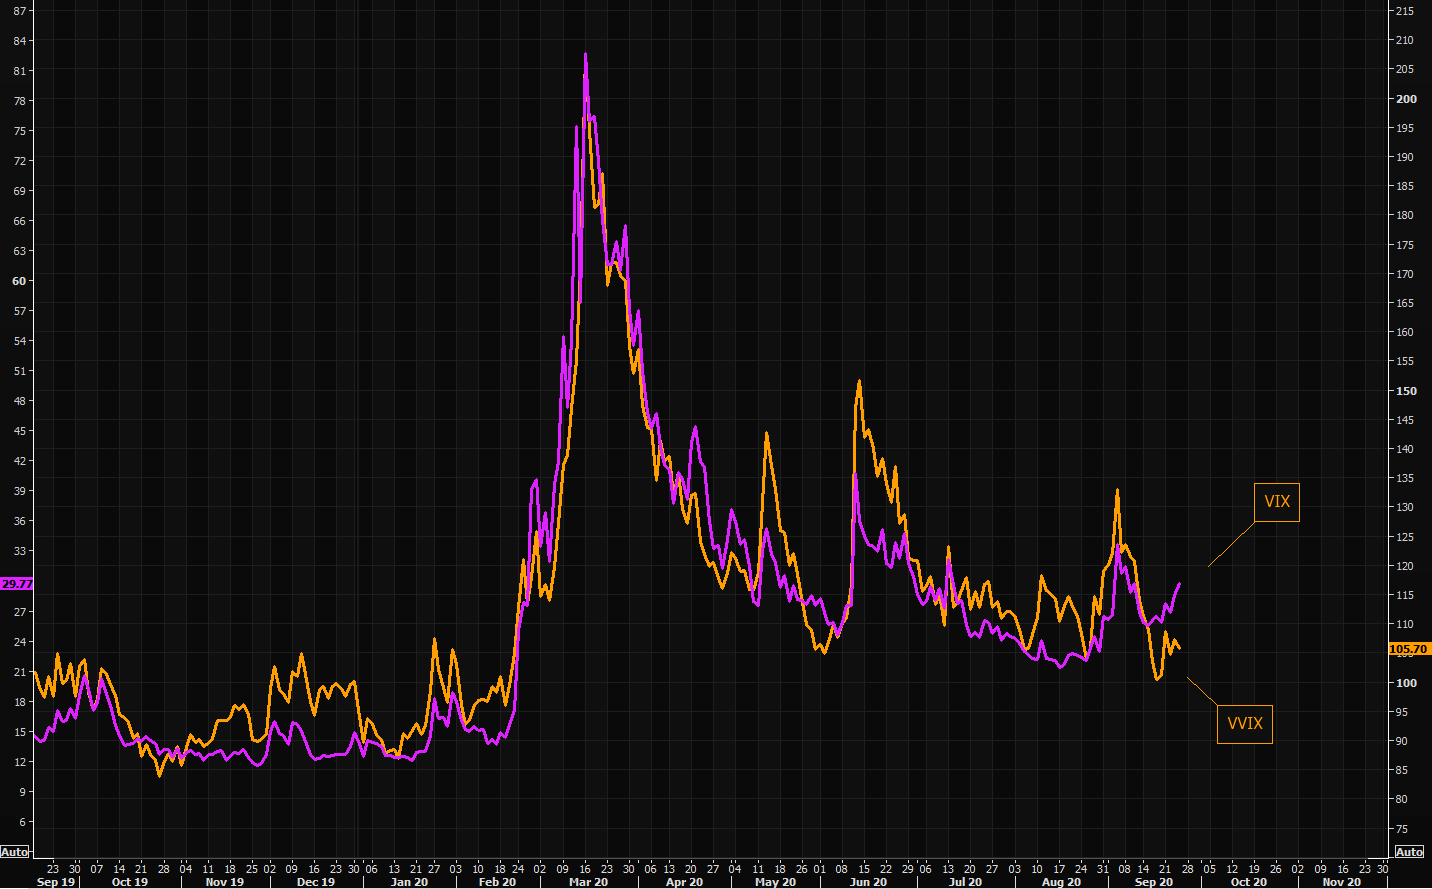 VVIX not "buying" much of the latest VIX spike